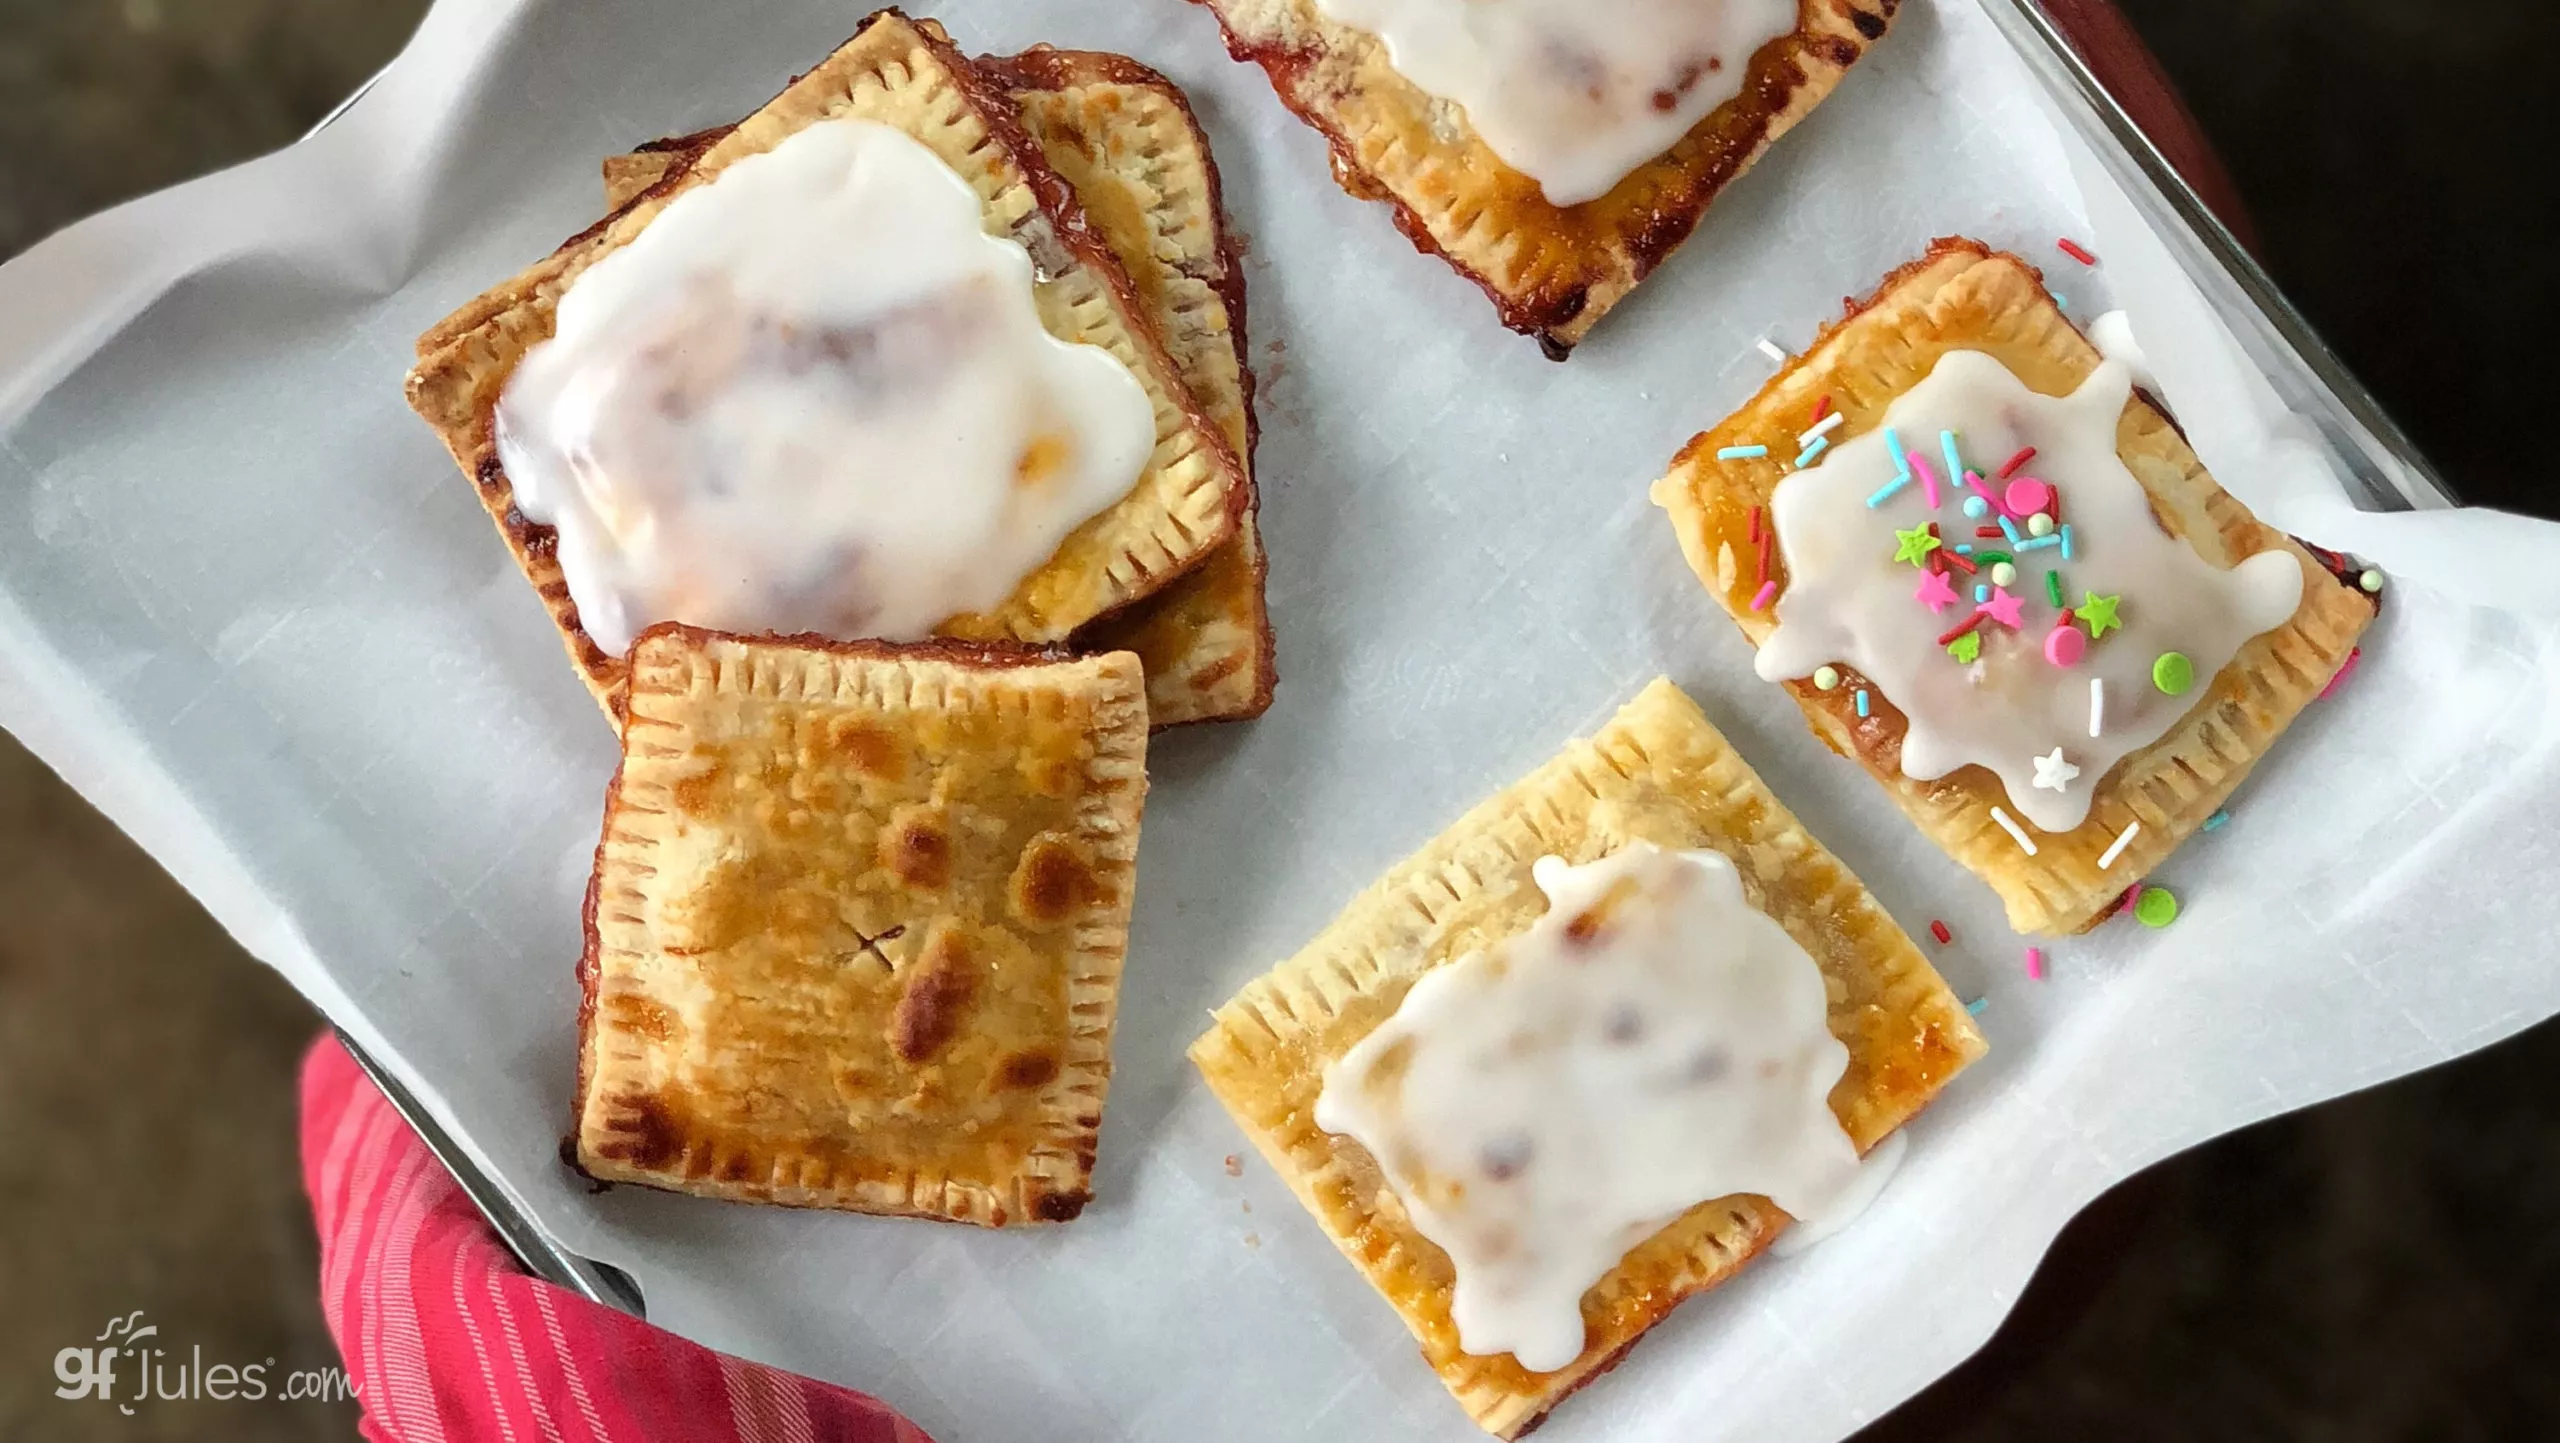 Pop-Tarts Just Told Us the Real Reason Why the Pastries Are Sold in 2-Packs